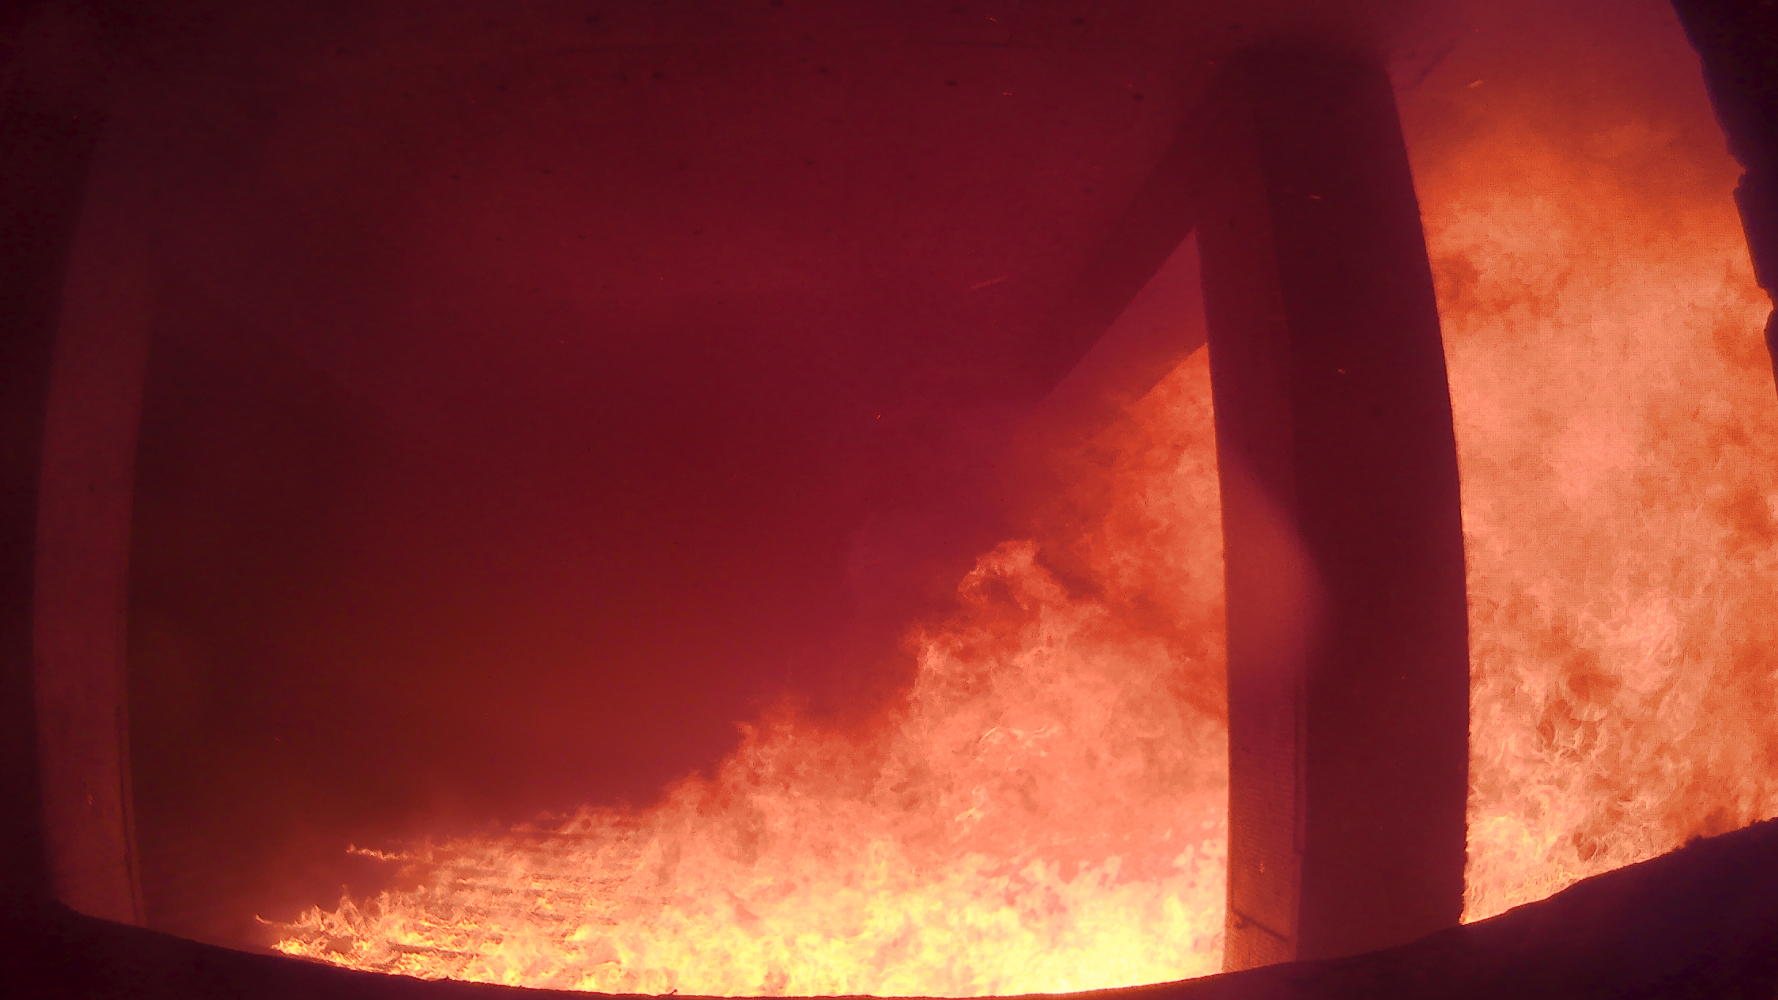 Photo taken from inside the world's largest indoor fire experiment, performed by Imperial Hazelab and collaborators in May 2019. The fire front spreads along unburned wood in the left of the photo (the leading end) and fully develops into large blaze on the right (the trailing end).
